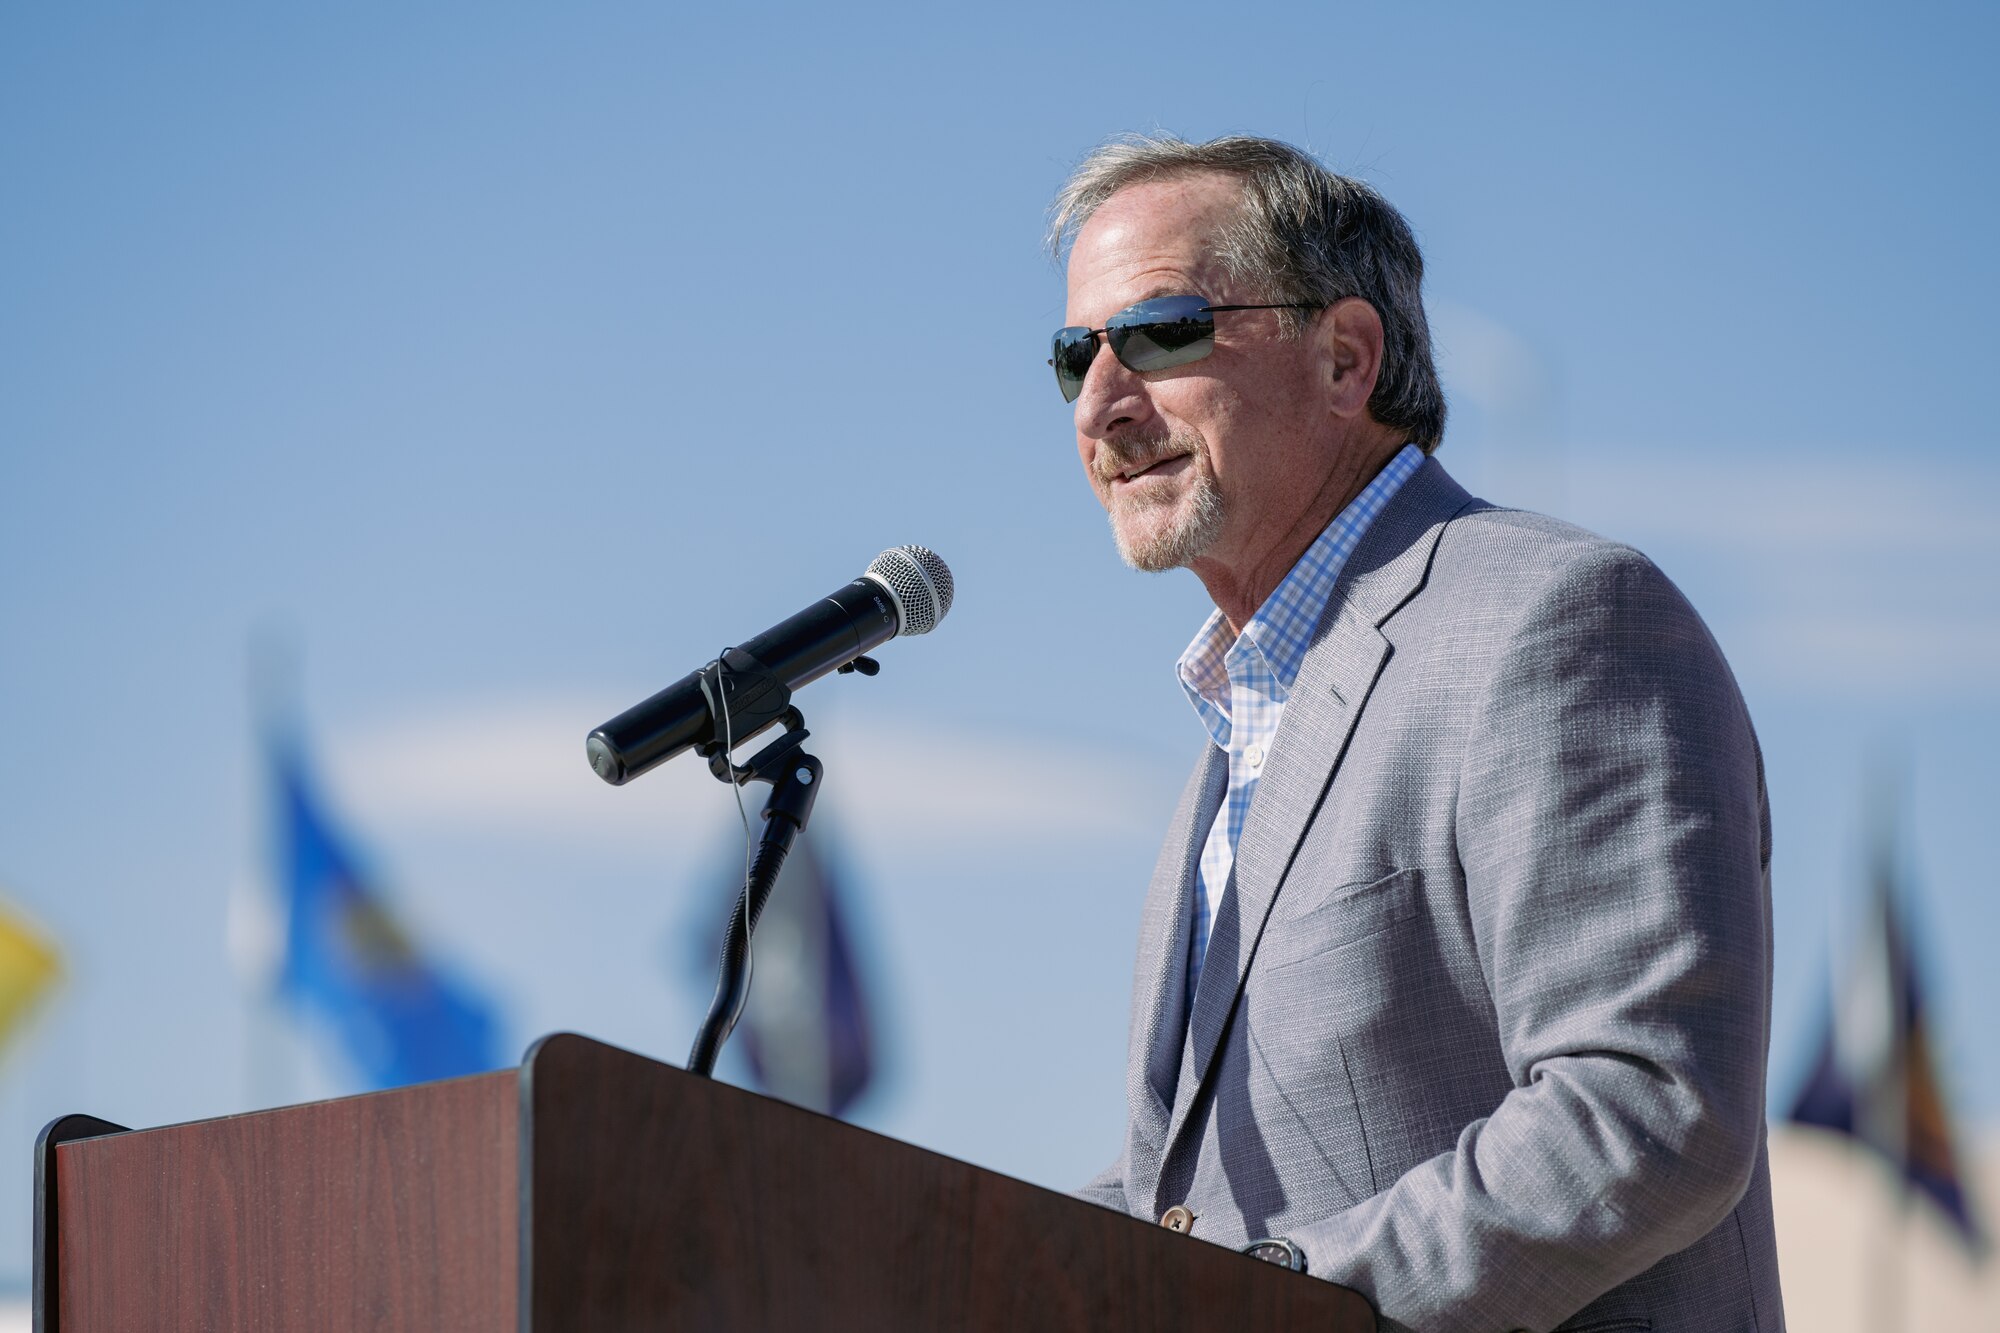 Retired U.S. Air Force Gen. David L. Goldfein gives remarks during a street renaming ceremony at Holloman Air Force Base, New Mexico, Sept. 22, 2023. In June of 2006, Goldfein assumed command of the 49th Fighter Wing, which current members of the 49th Wing have decided to commemorate by naming a street in his honor. (U.S. Air Force photo by Senior Airman Antonio Salfran)